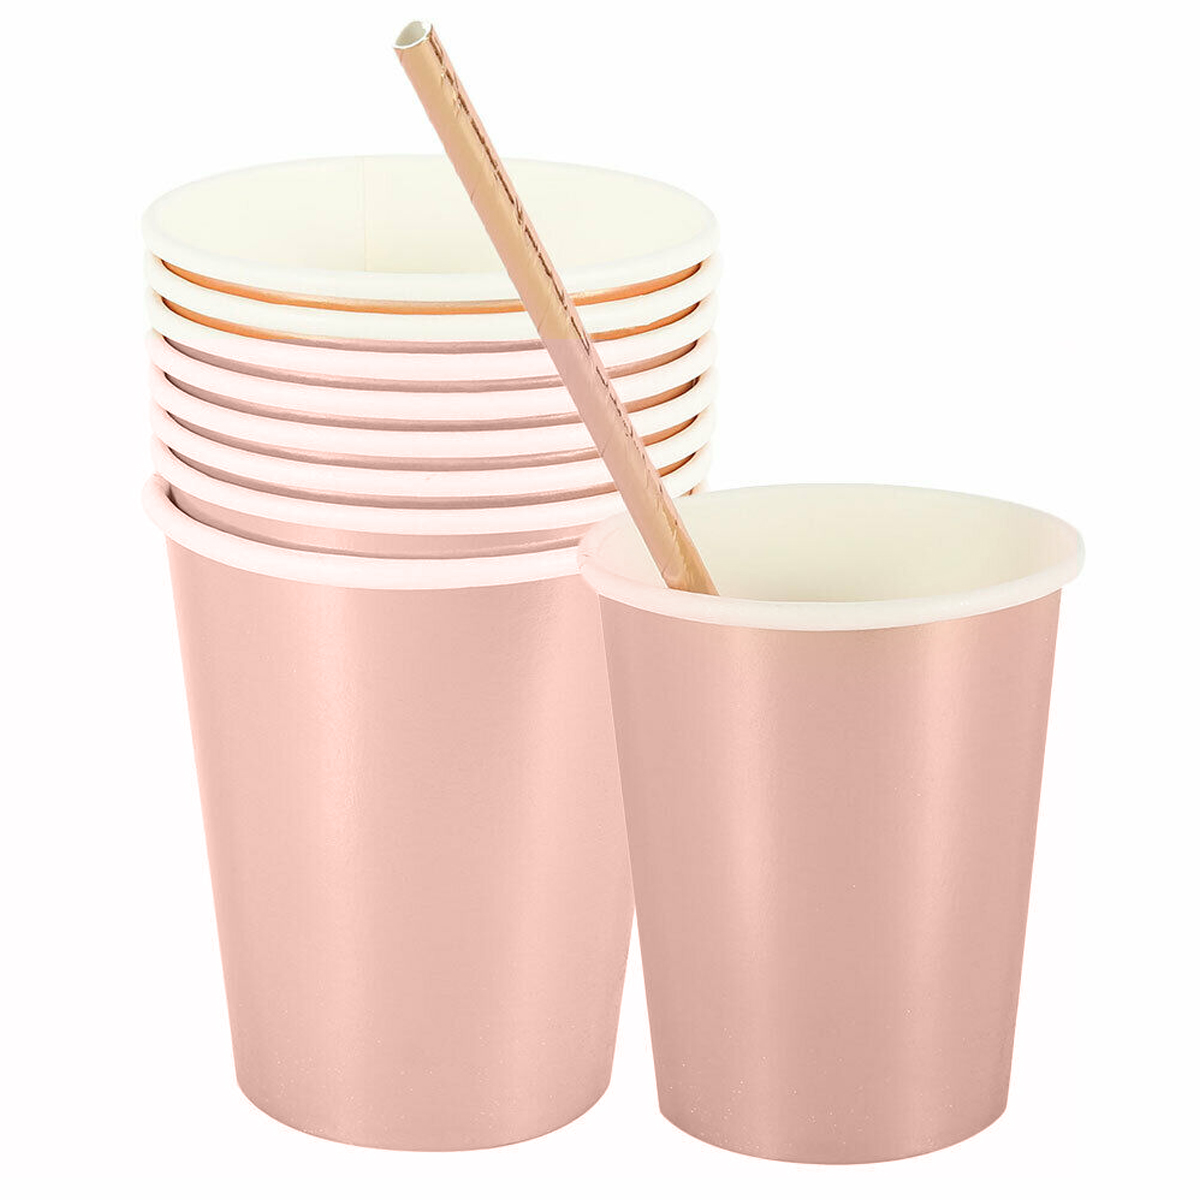 125pcs-Party-Disposable-Tableware-Set-Festival-Paper-Cups-Camping-Fork-Spoon-Rose-Gold-Plates-Straws-1662319-9